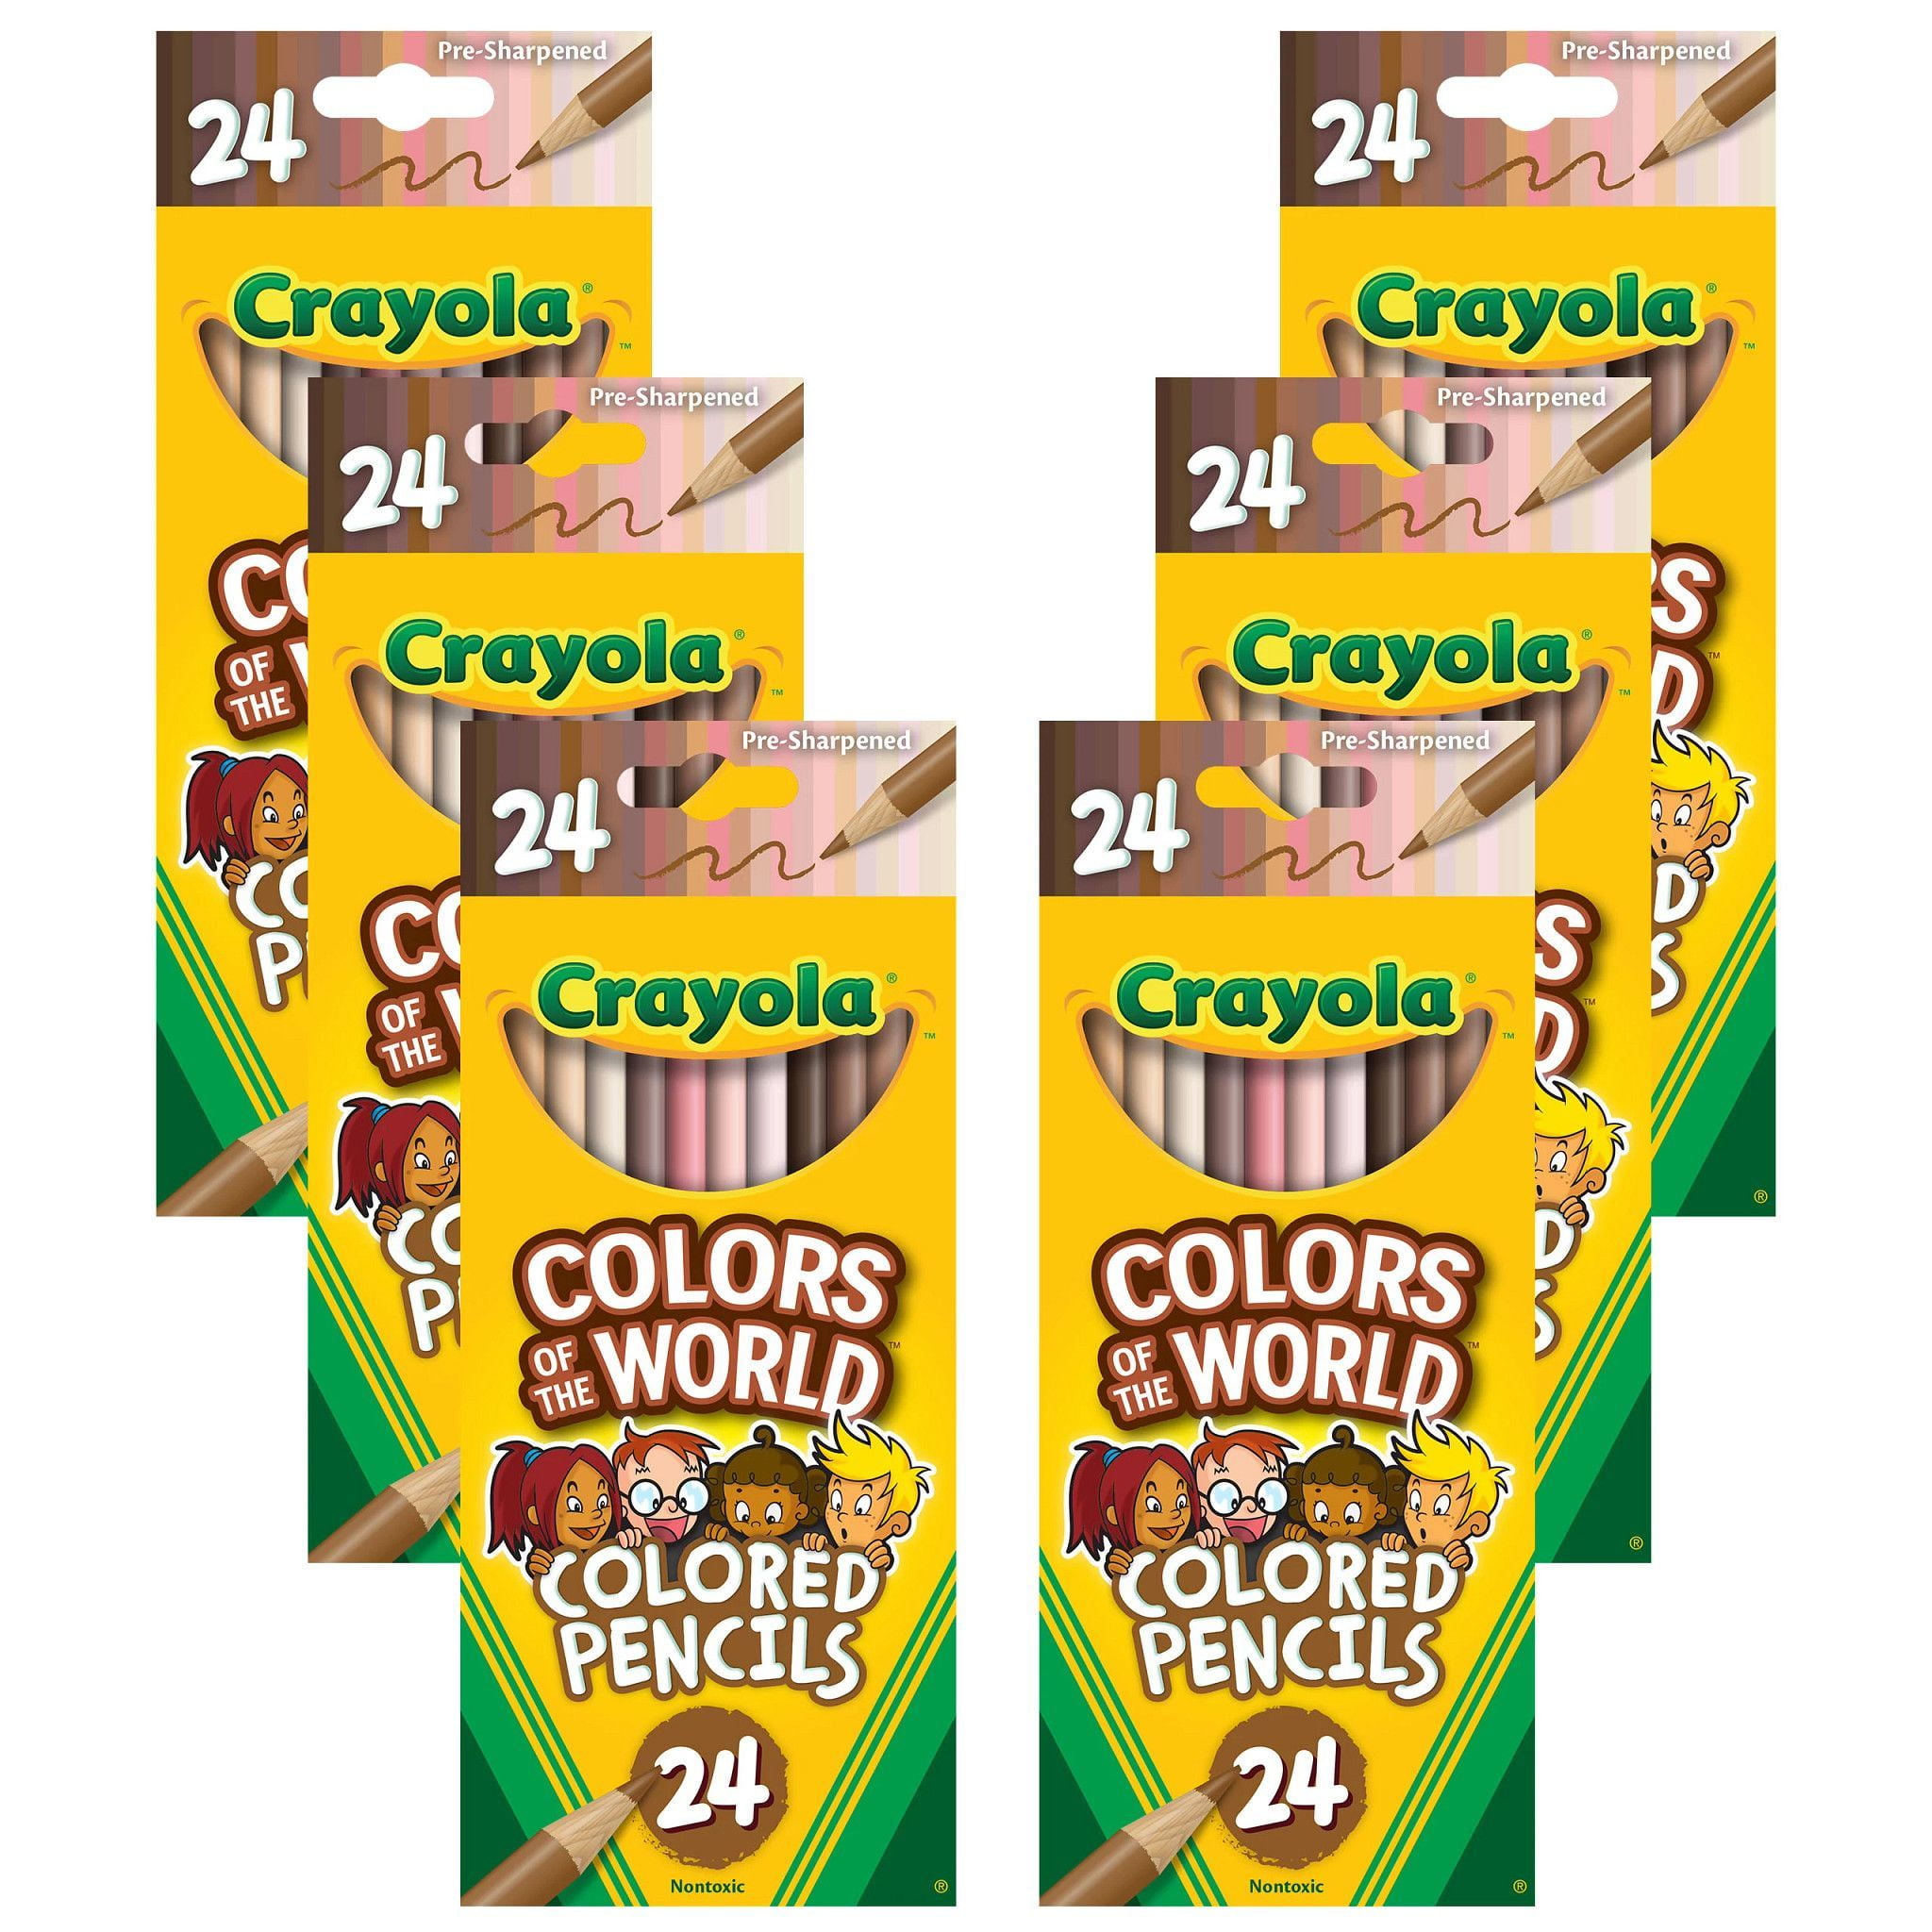 Crayola Full-Size Coloured Pencils, 24 Pack